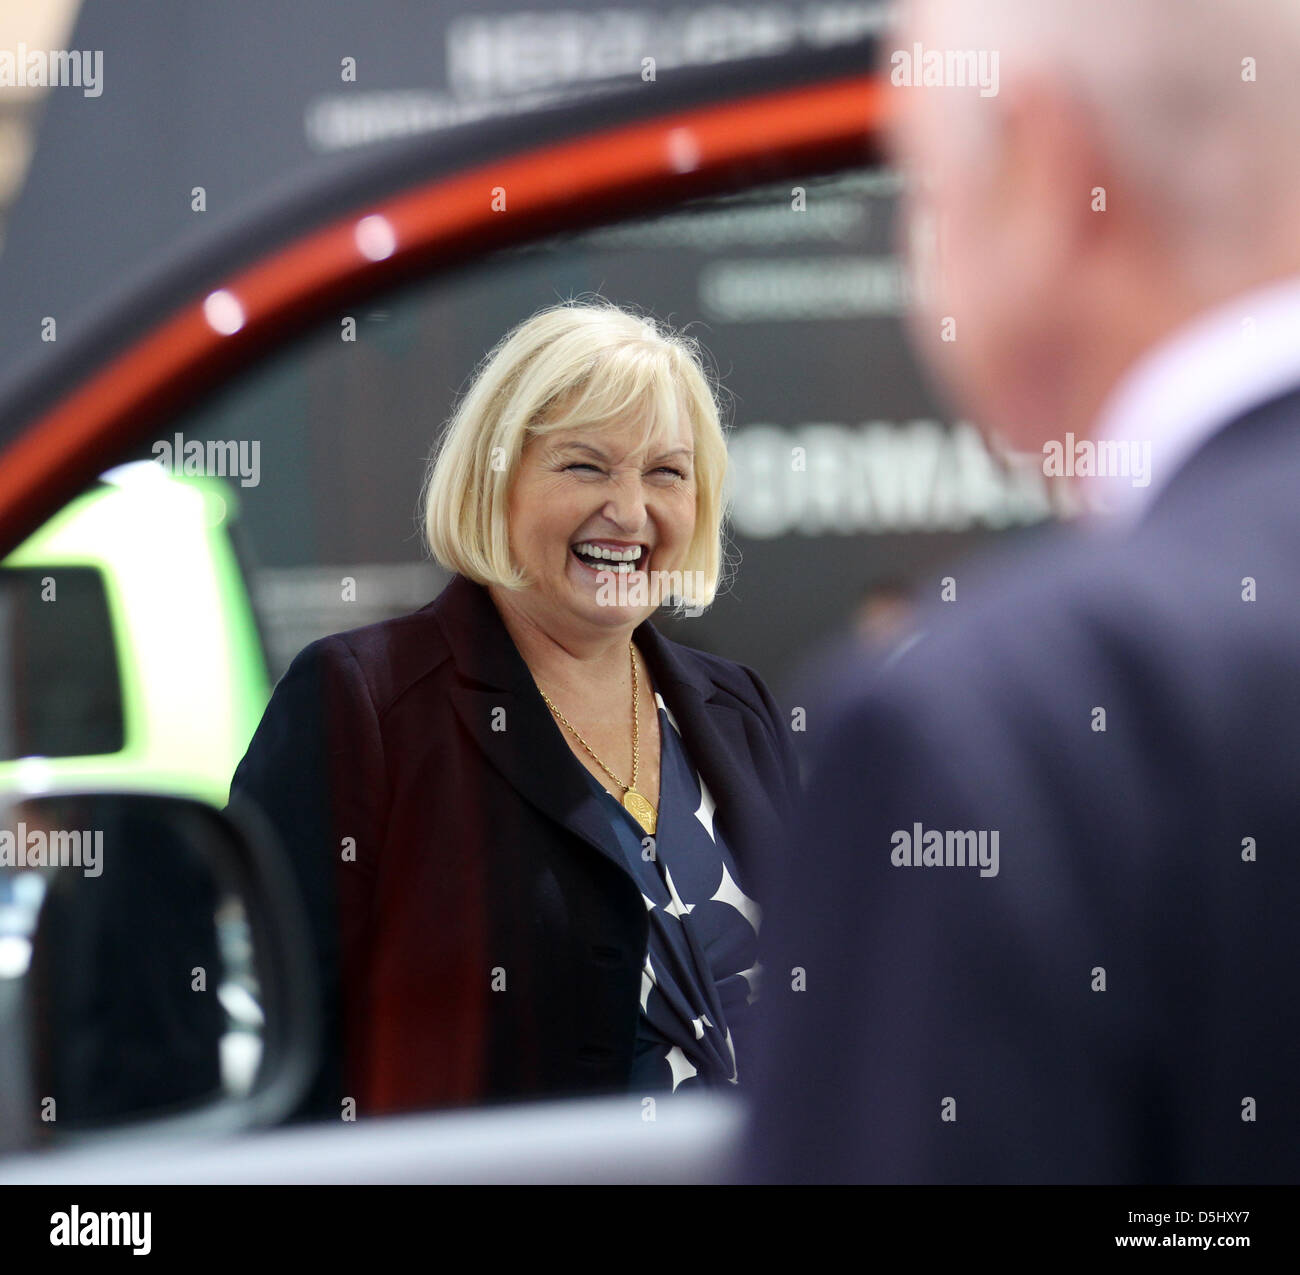 Ursula Piech, member of the supervisory board at Volkswagen, smiles through a pane of glass at the Volkswagen stand at the IAA Frankfurt Motor Show for commercial vehichles in Hanover, Germany, 18 September 2012. The 64th IAA commercial vehichles fair runs from 20 until 27 September 2012. Photo: FRISO GENTSCH Stock Photo